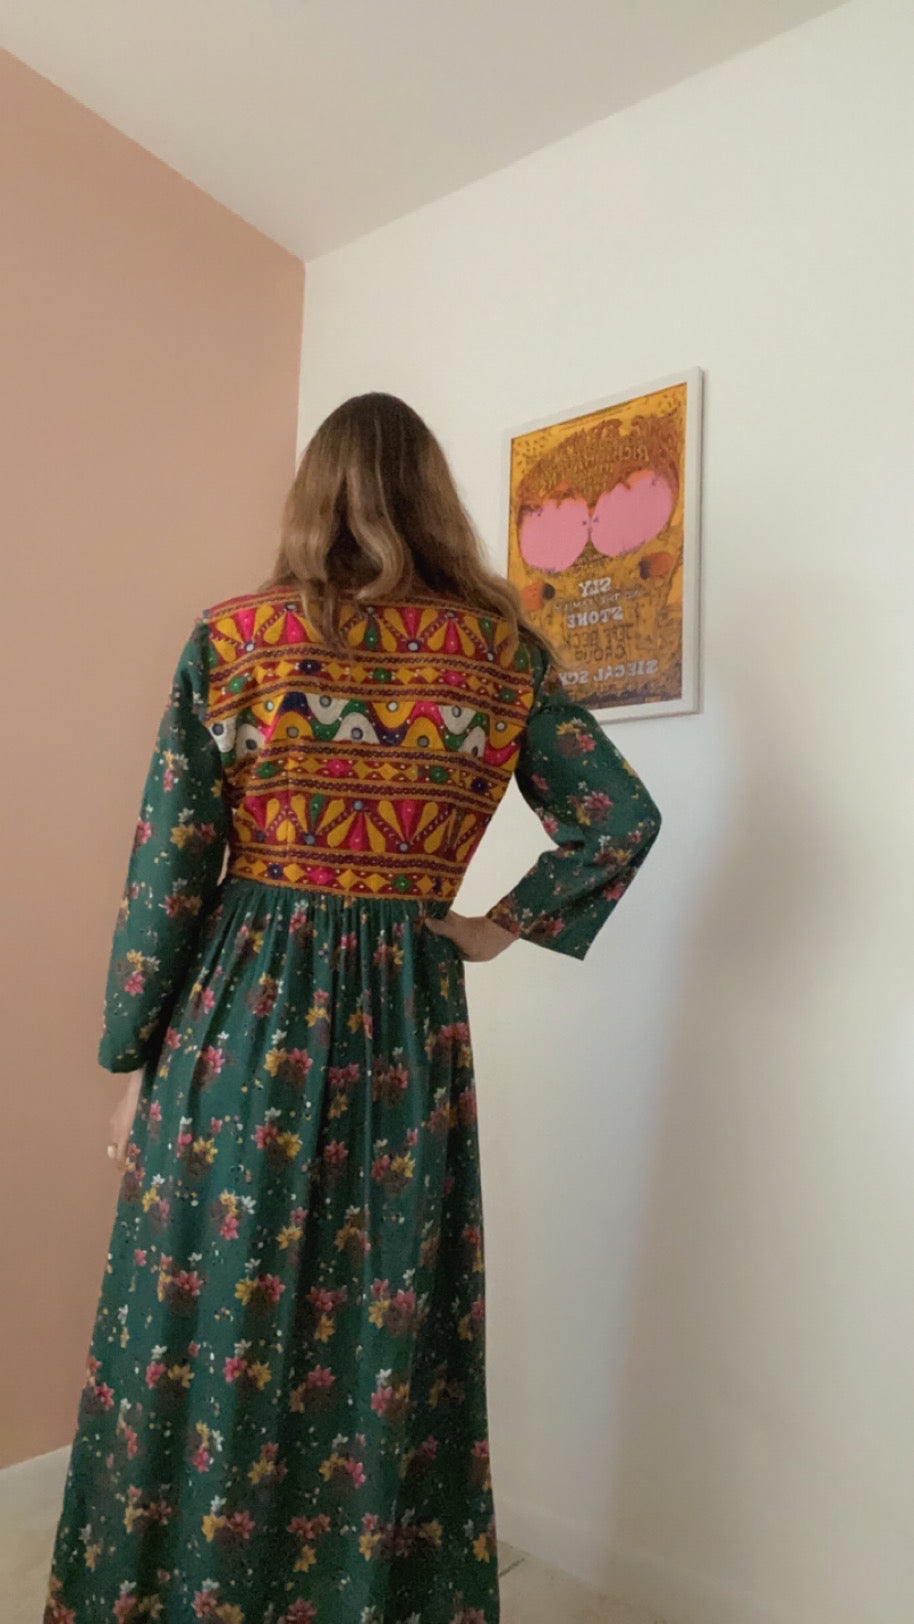 Hand Embroidered 70s Boho Dream Dress from India, size M